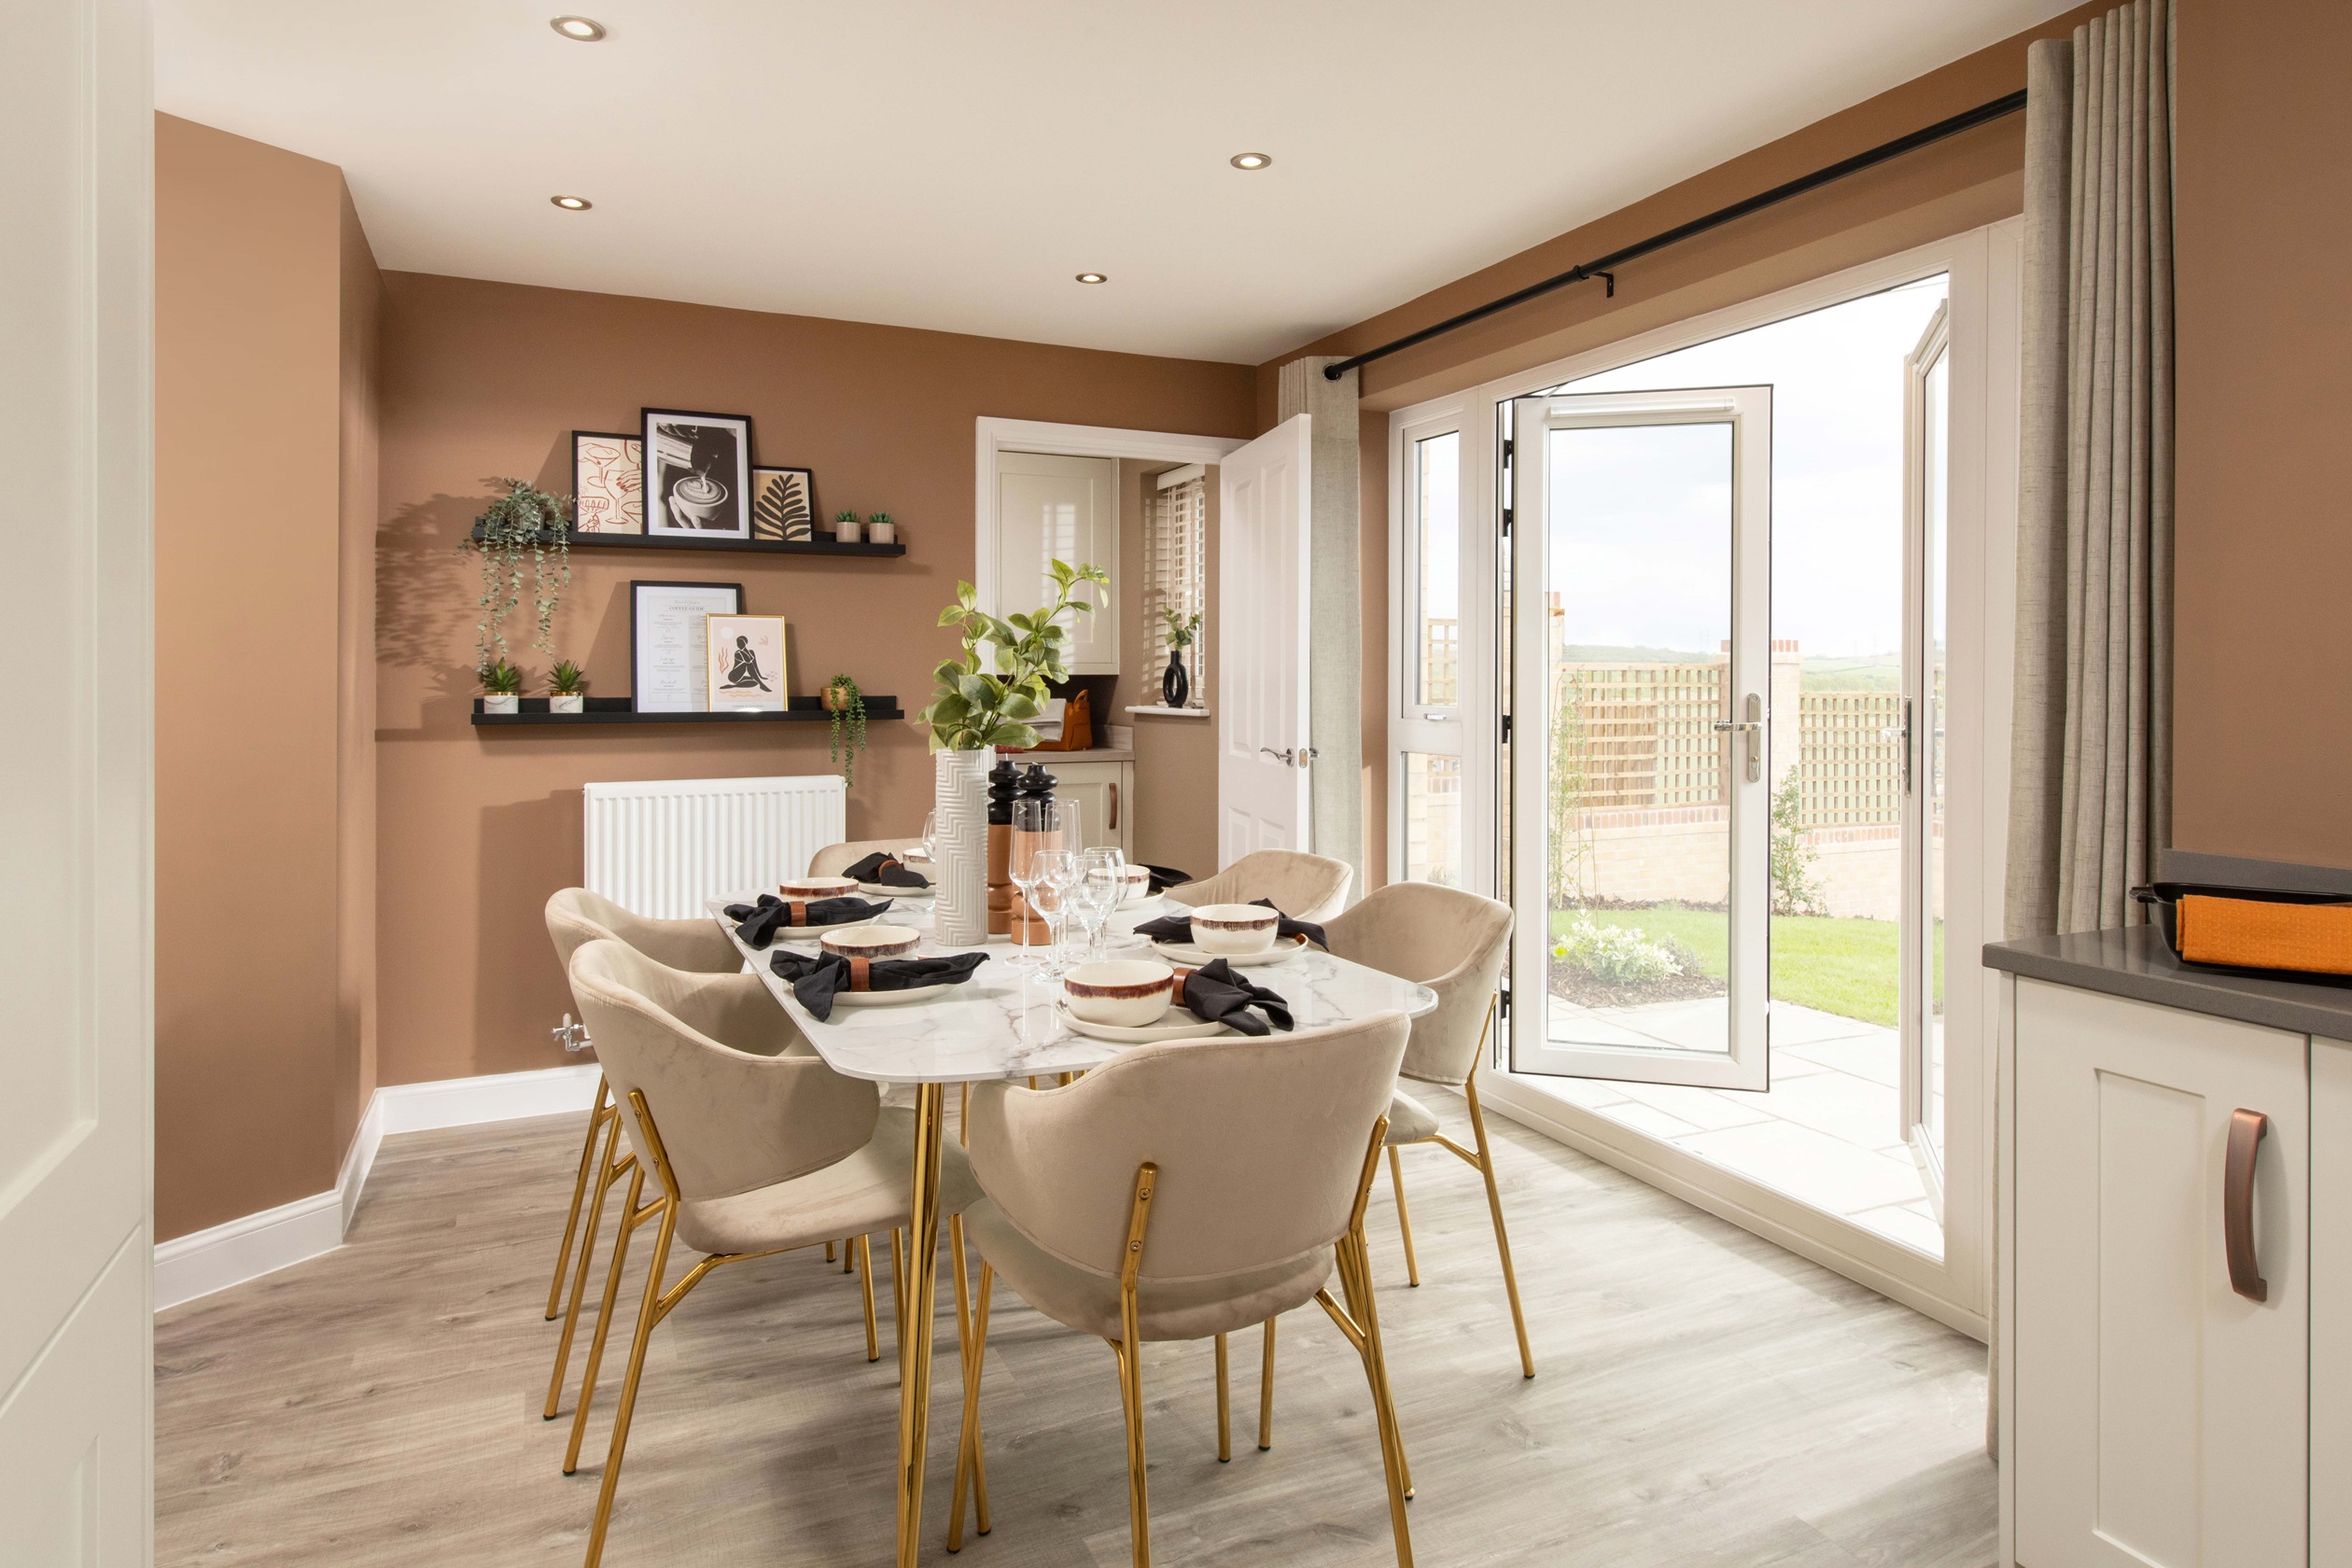 Property 3 of 10. Bar Yw Affinity Windermere Show Home